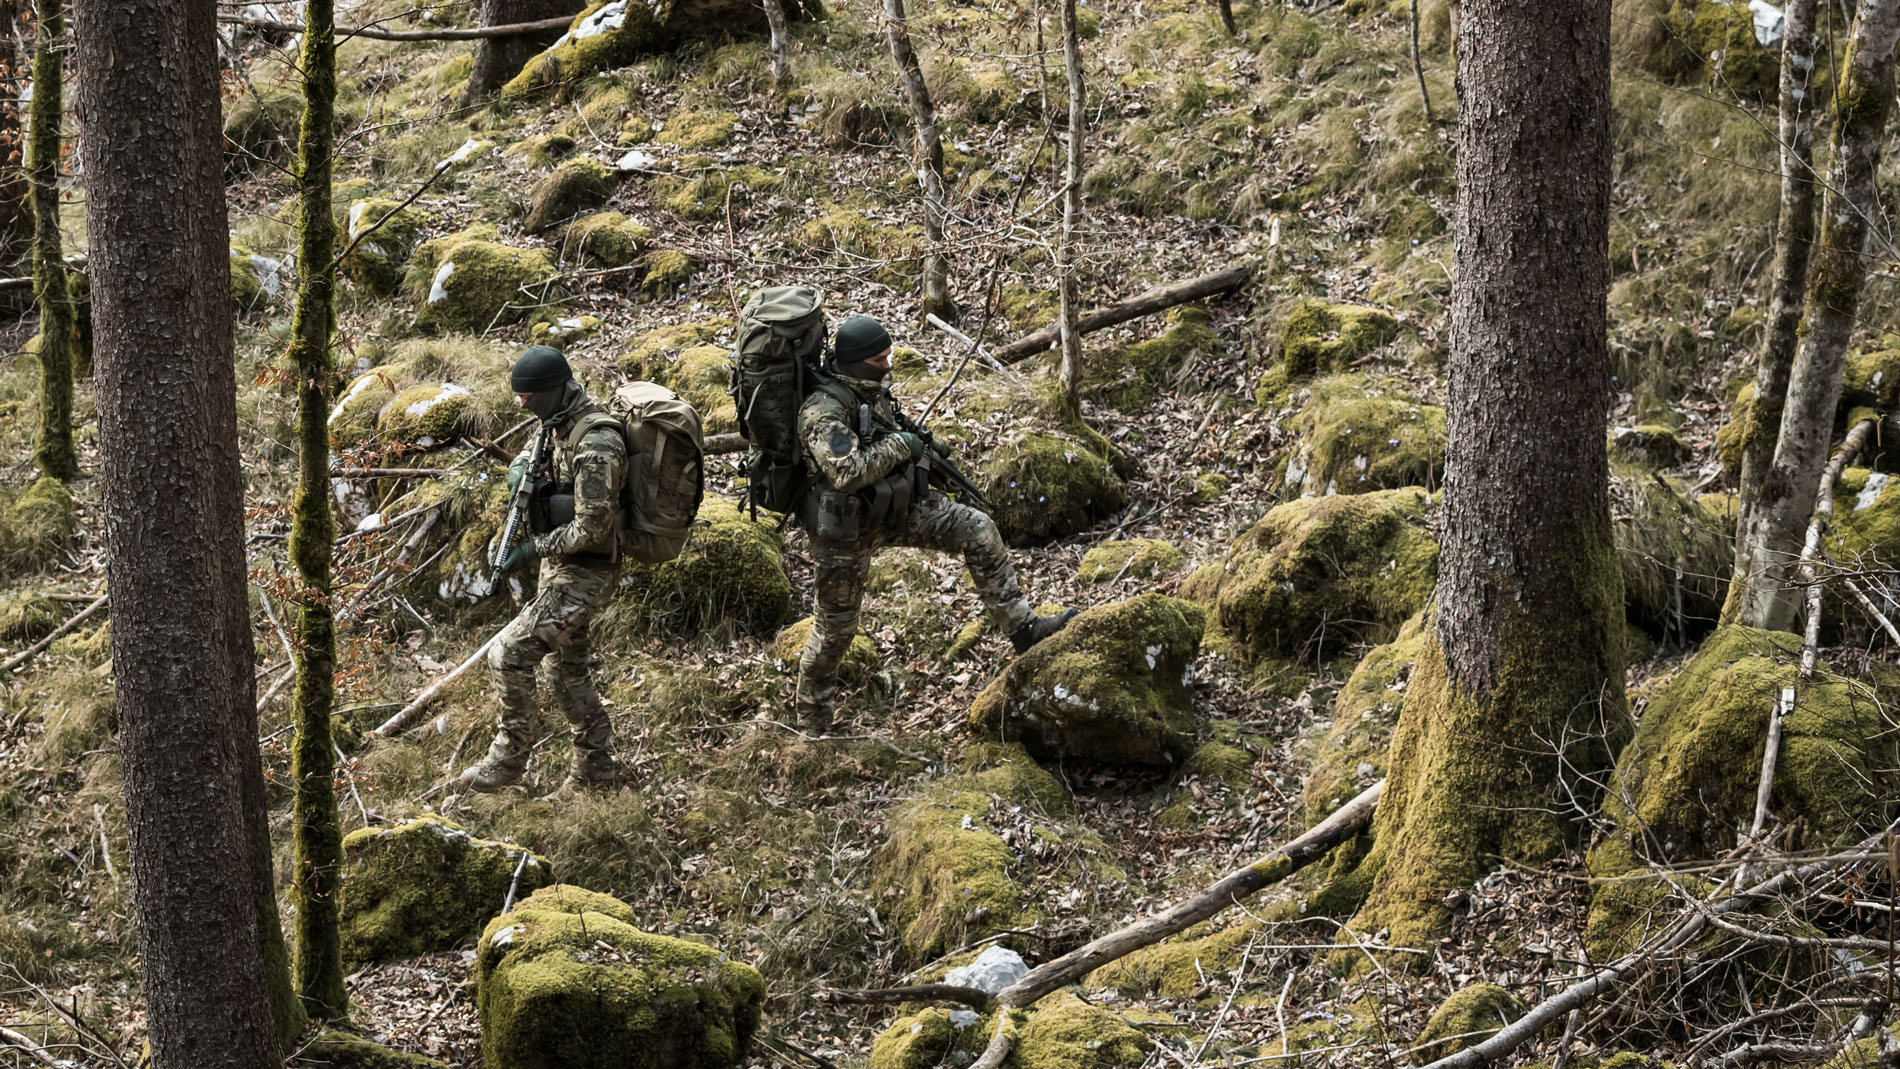 Hiding in plain sight: the science behind military camouflage